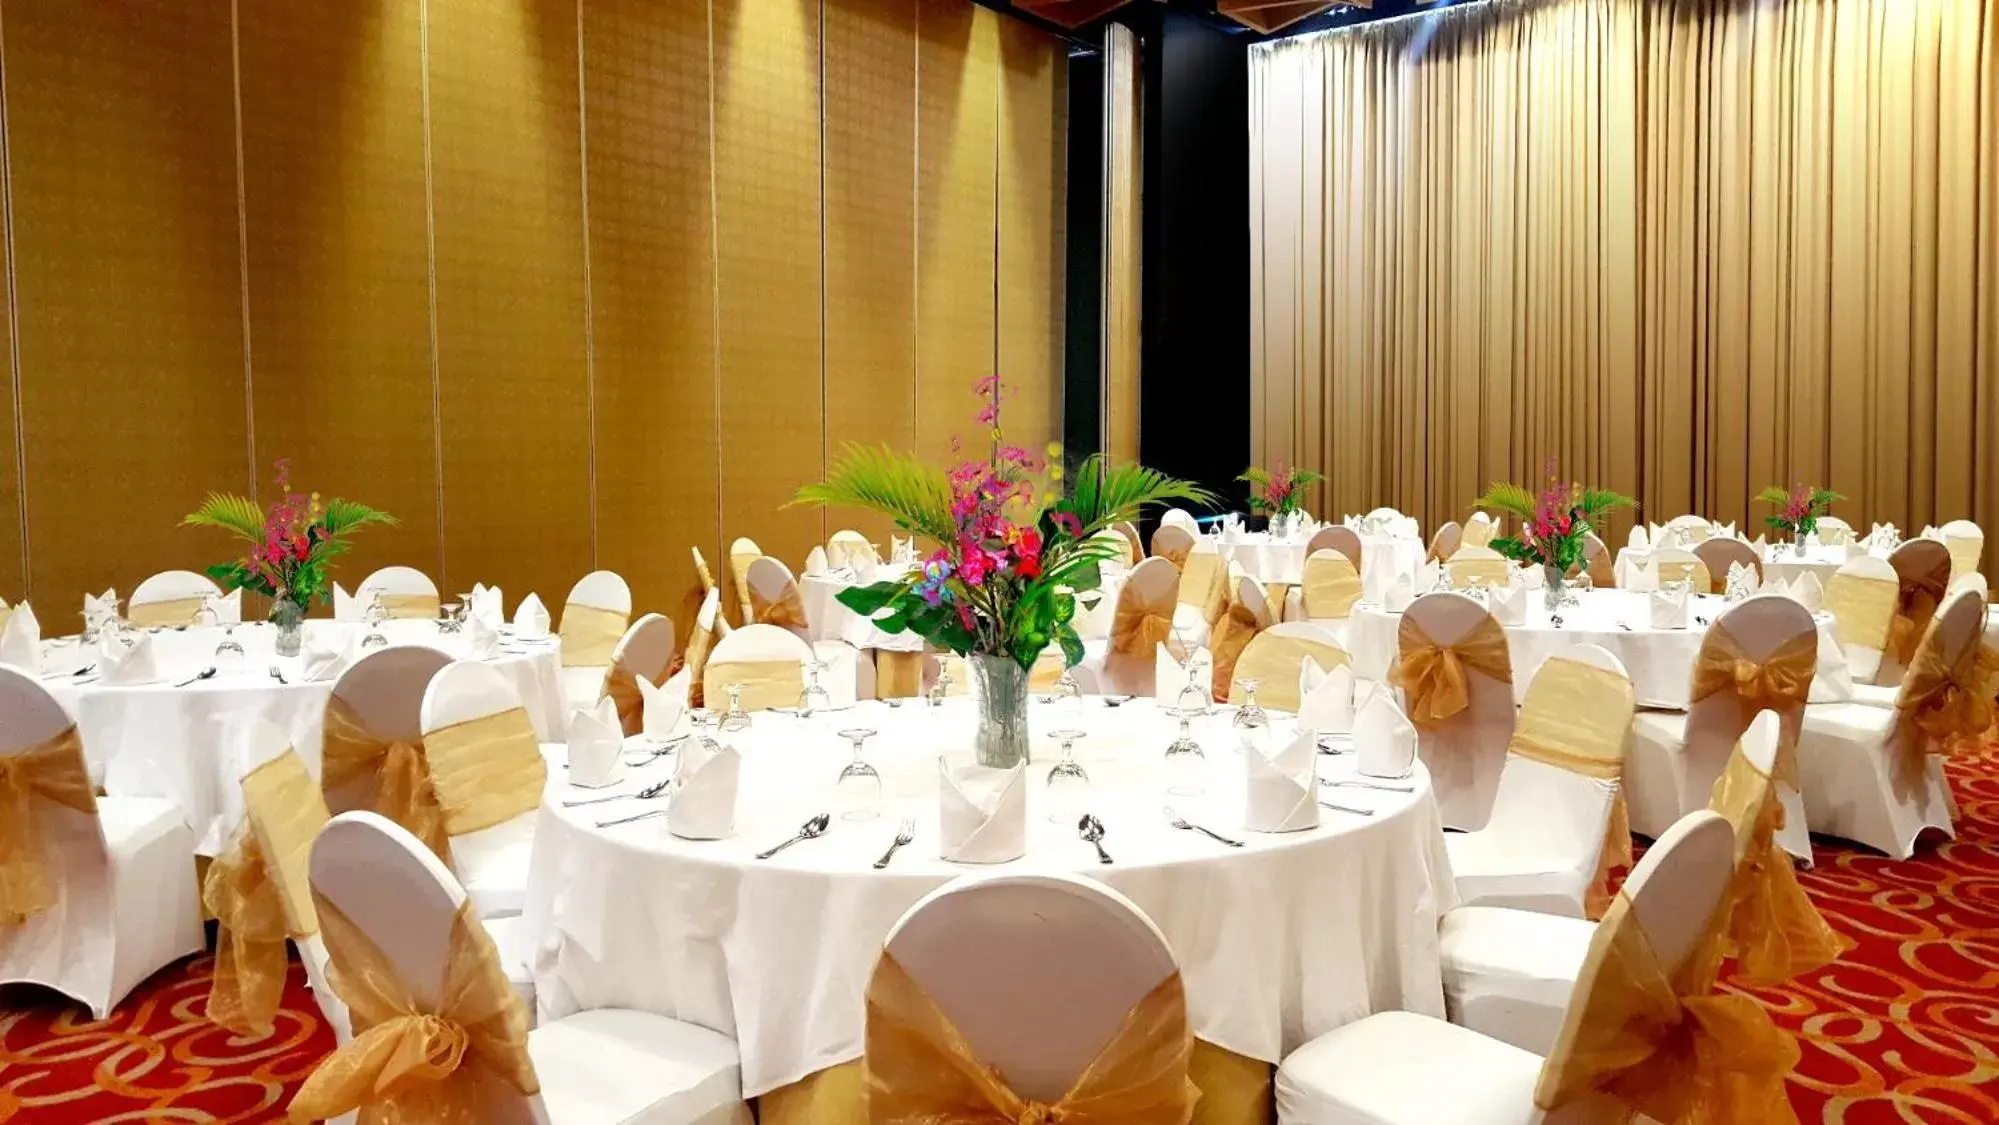 Meeting/conference room, Banquet Facilities in ASTON Palembang Hotel & Conference Centre